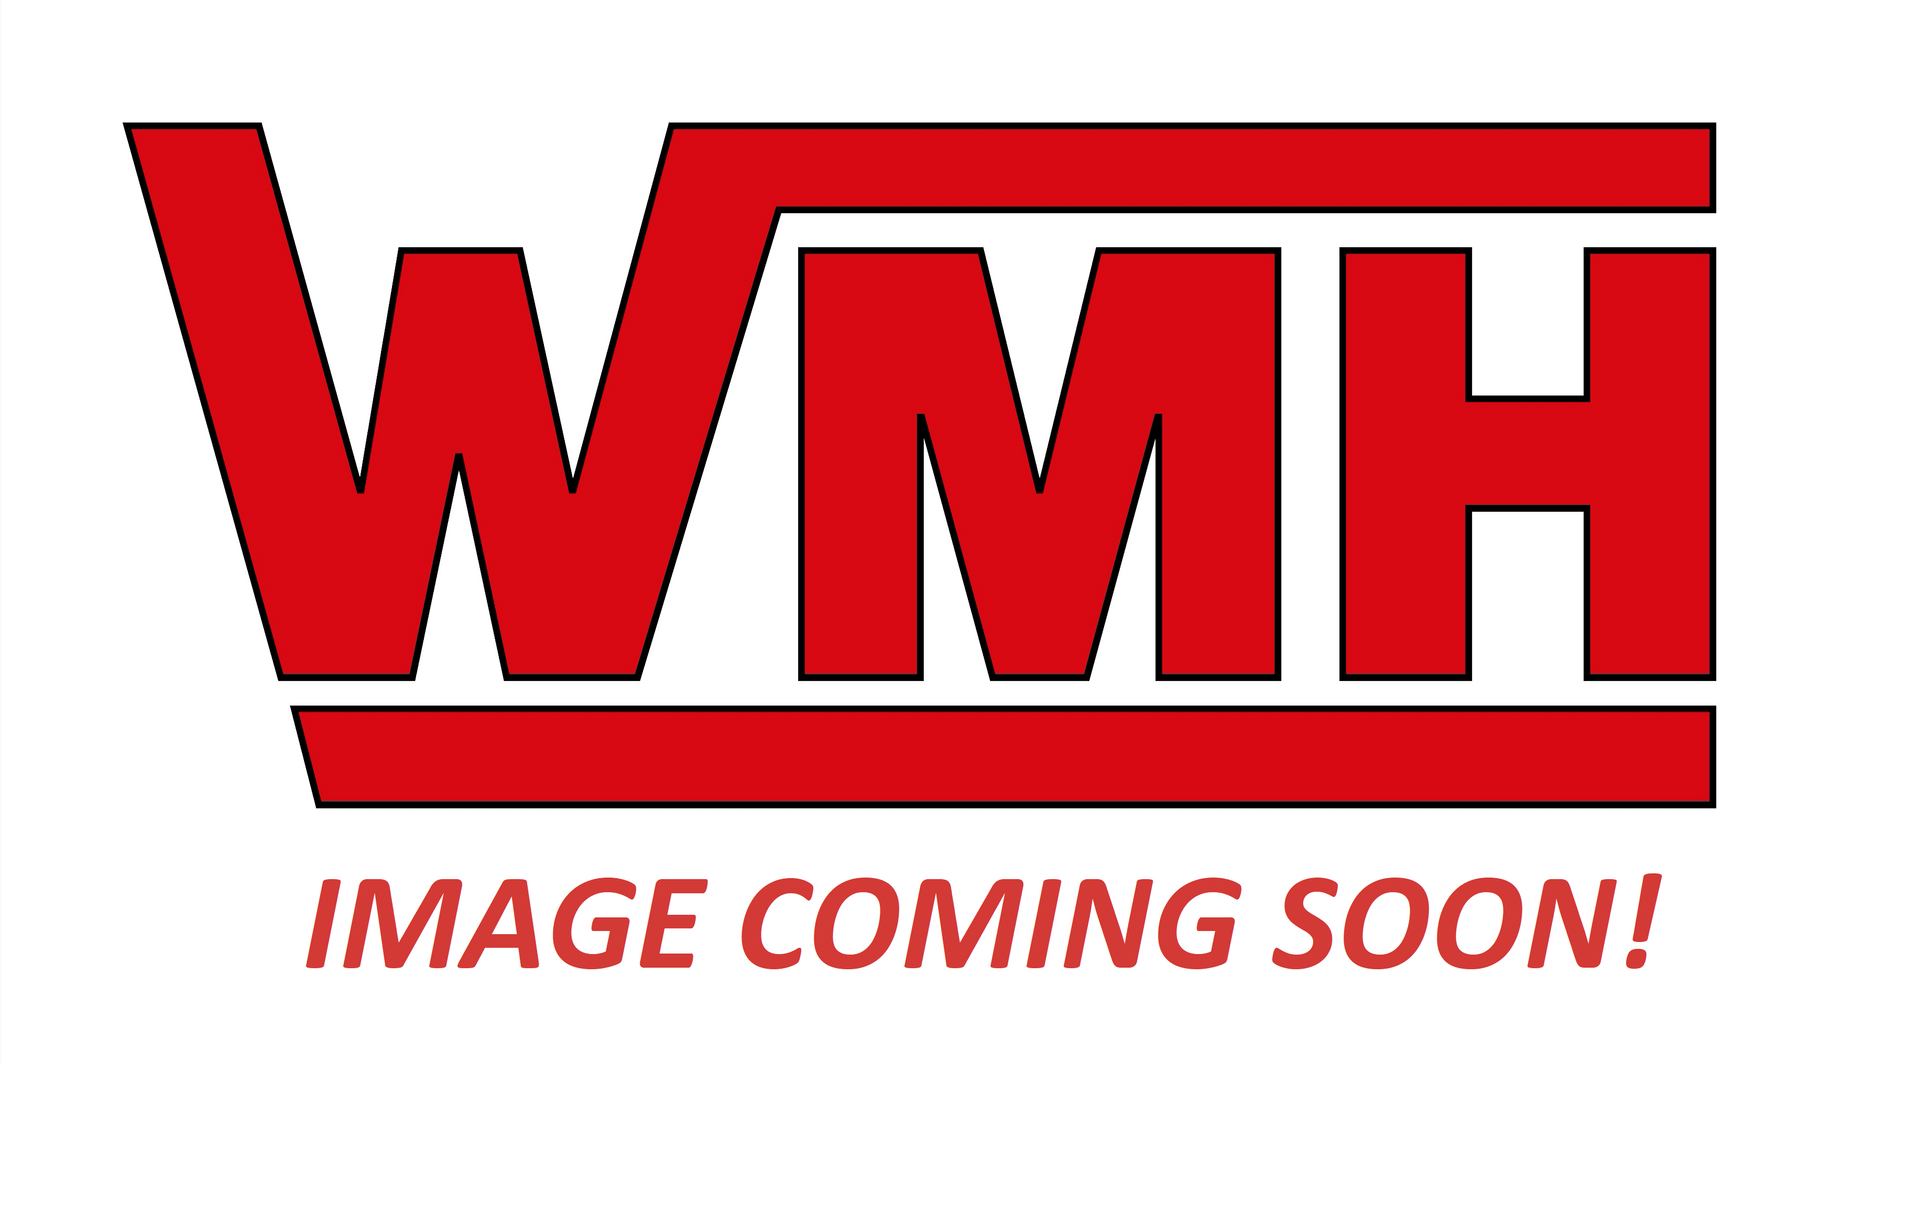 A red and white logo that says image coming soon.